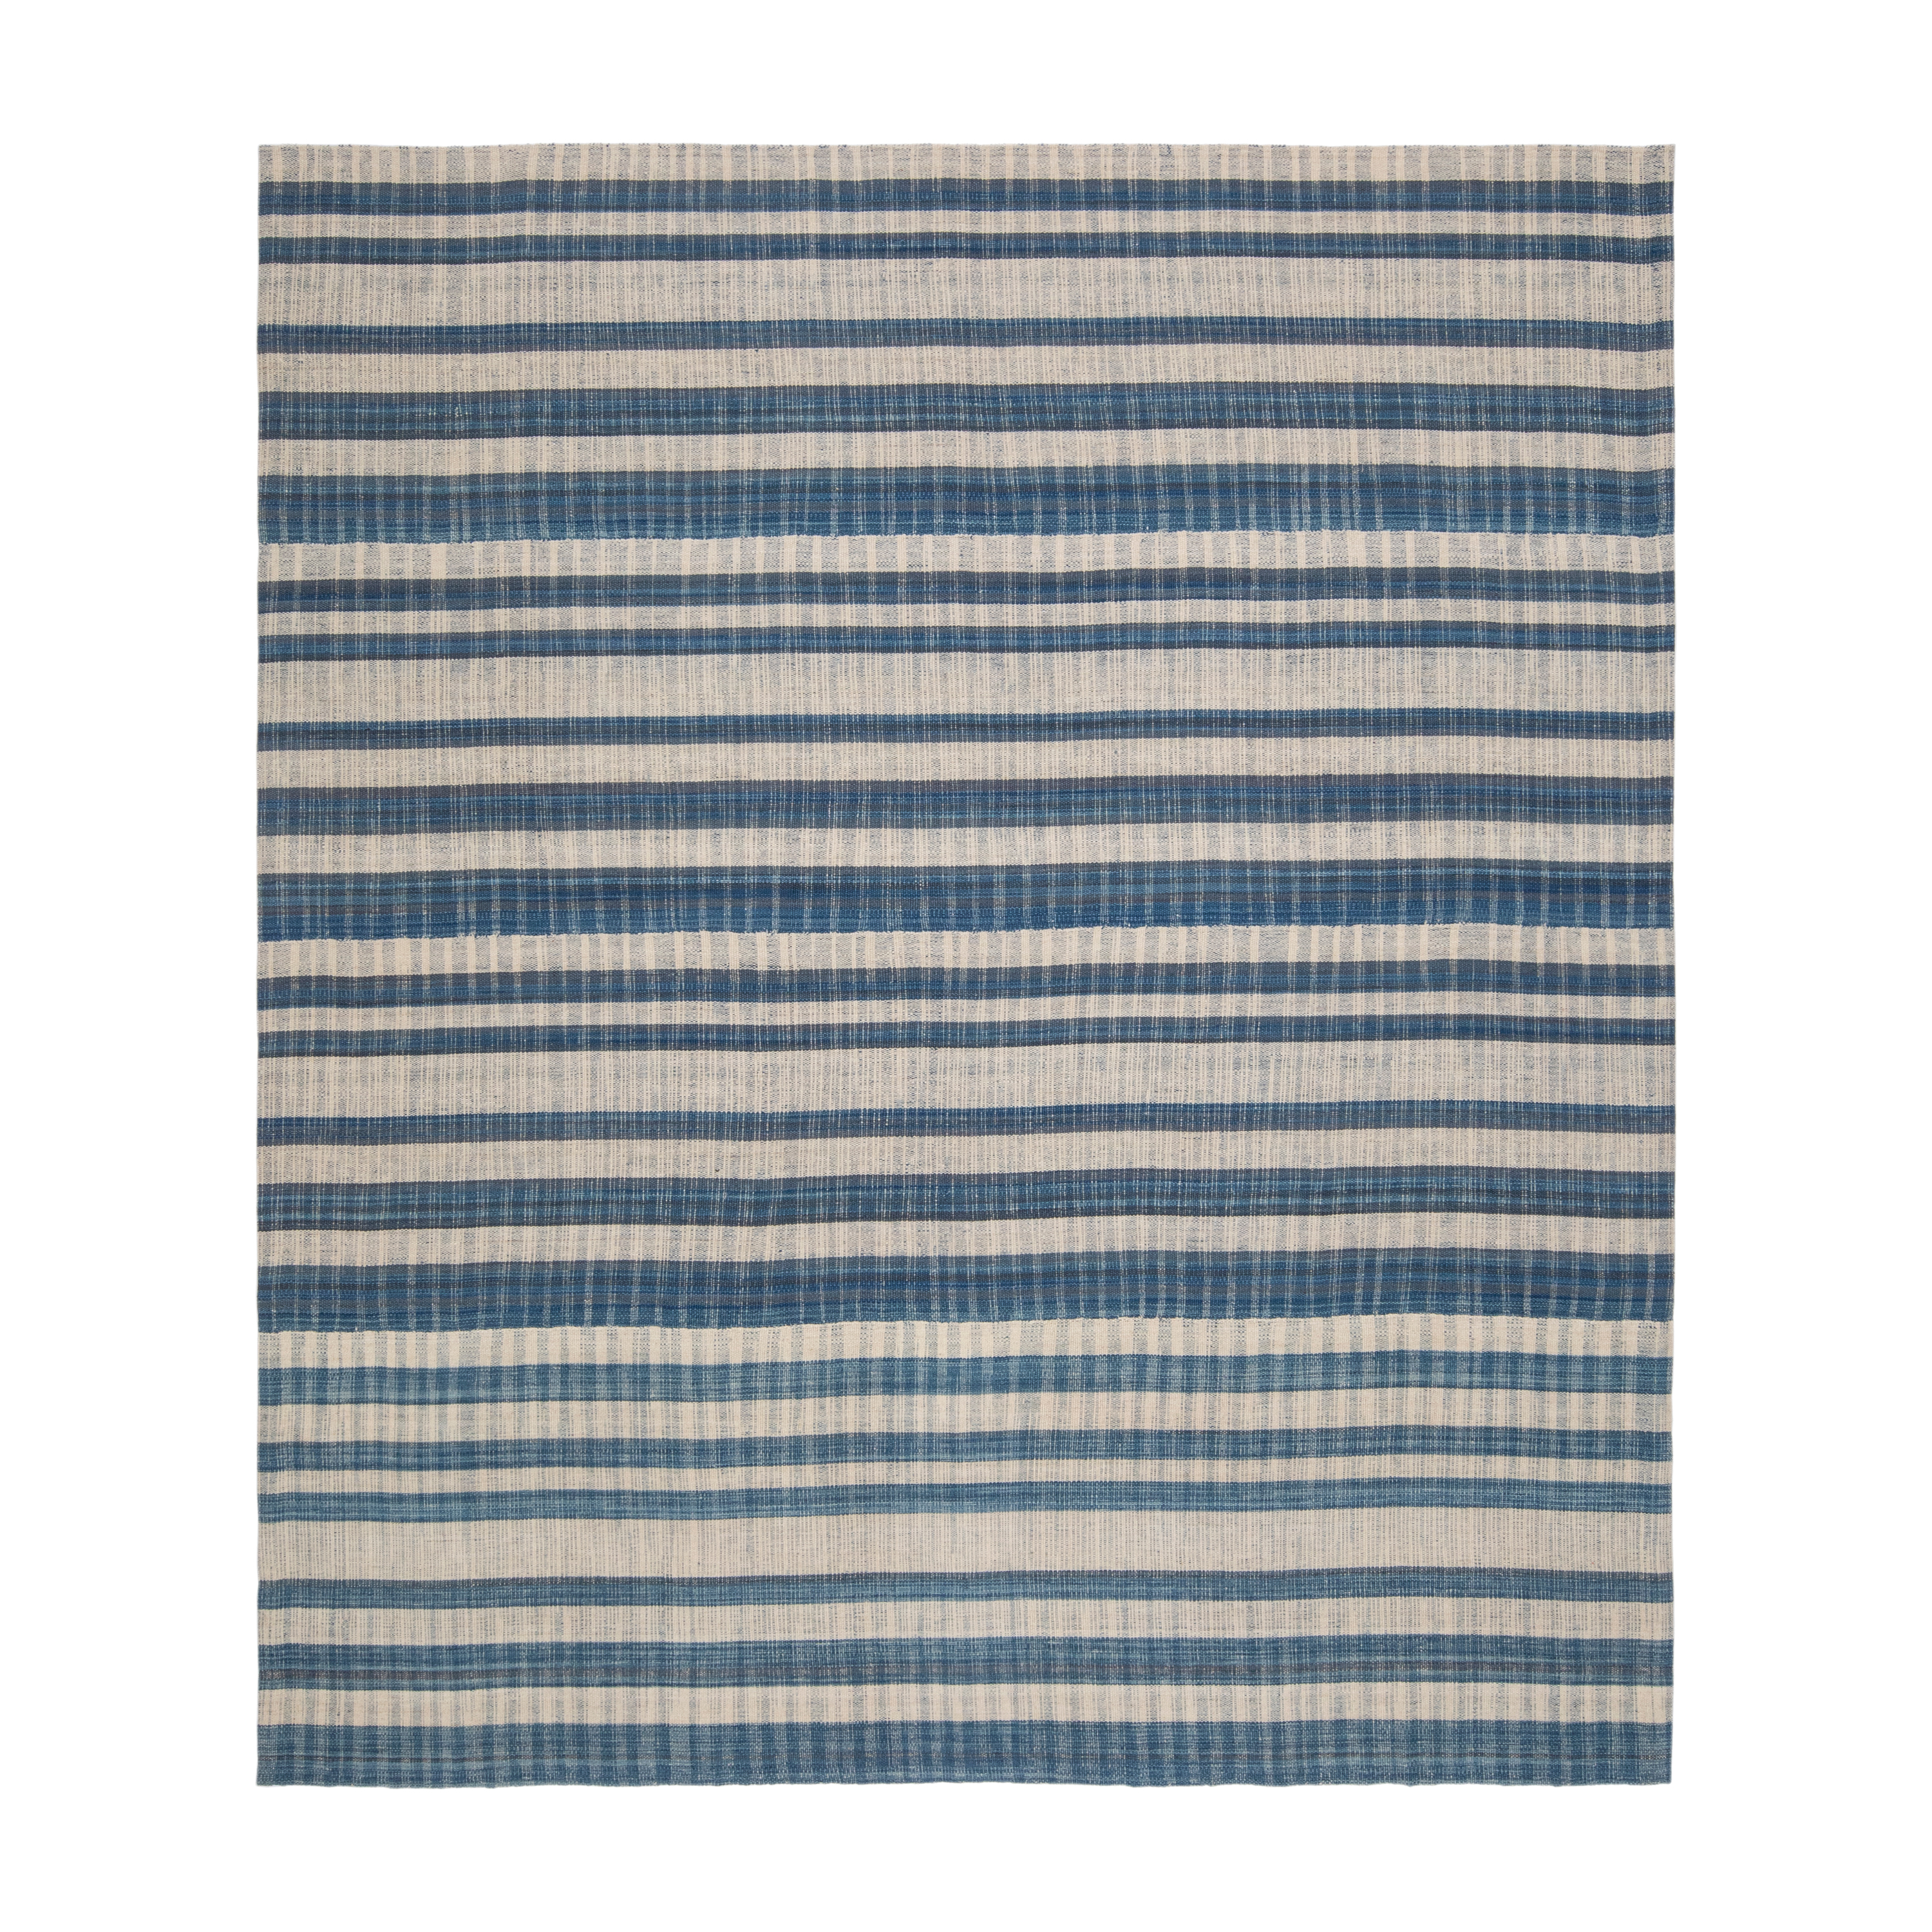 This Pelas Flatweave has a minimalist and modern design that can last a lifetime.